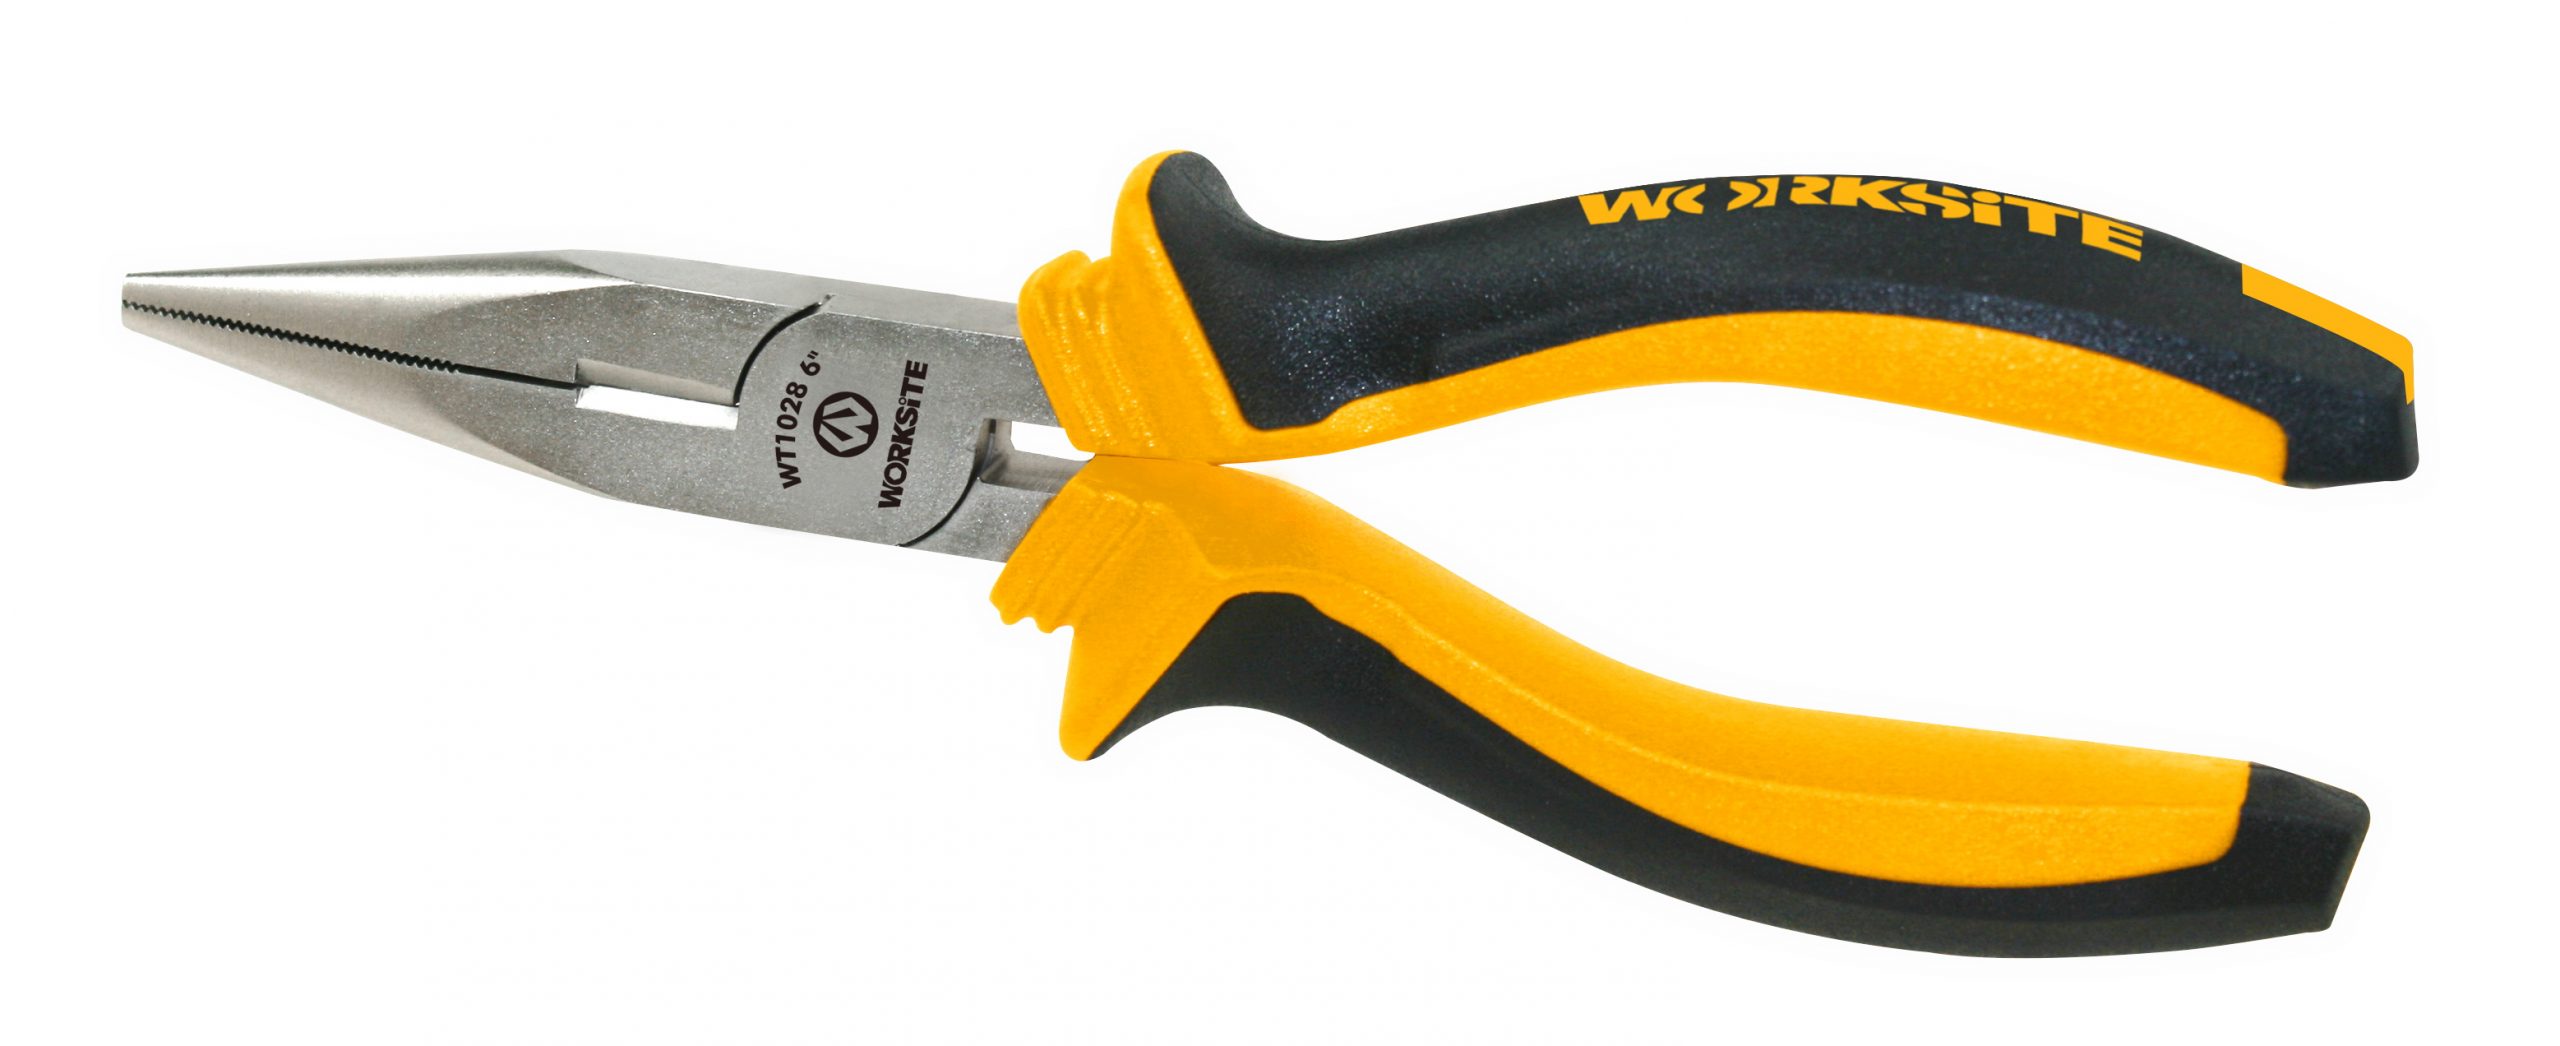 Worksite Long Nose Cutter Pliers, 6inch/8inch Insulated, Multi Functional Pulling out, Clamping, Cutting Wires, Electrician Pliers WT1028/WT1029